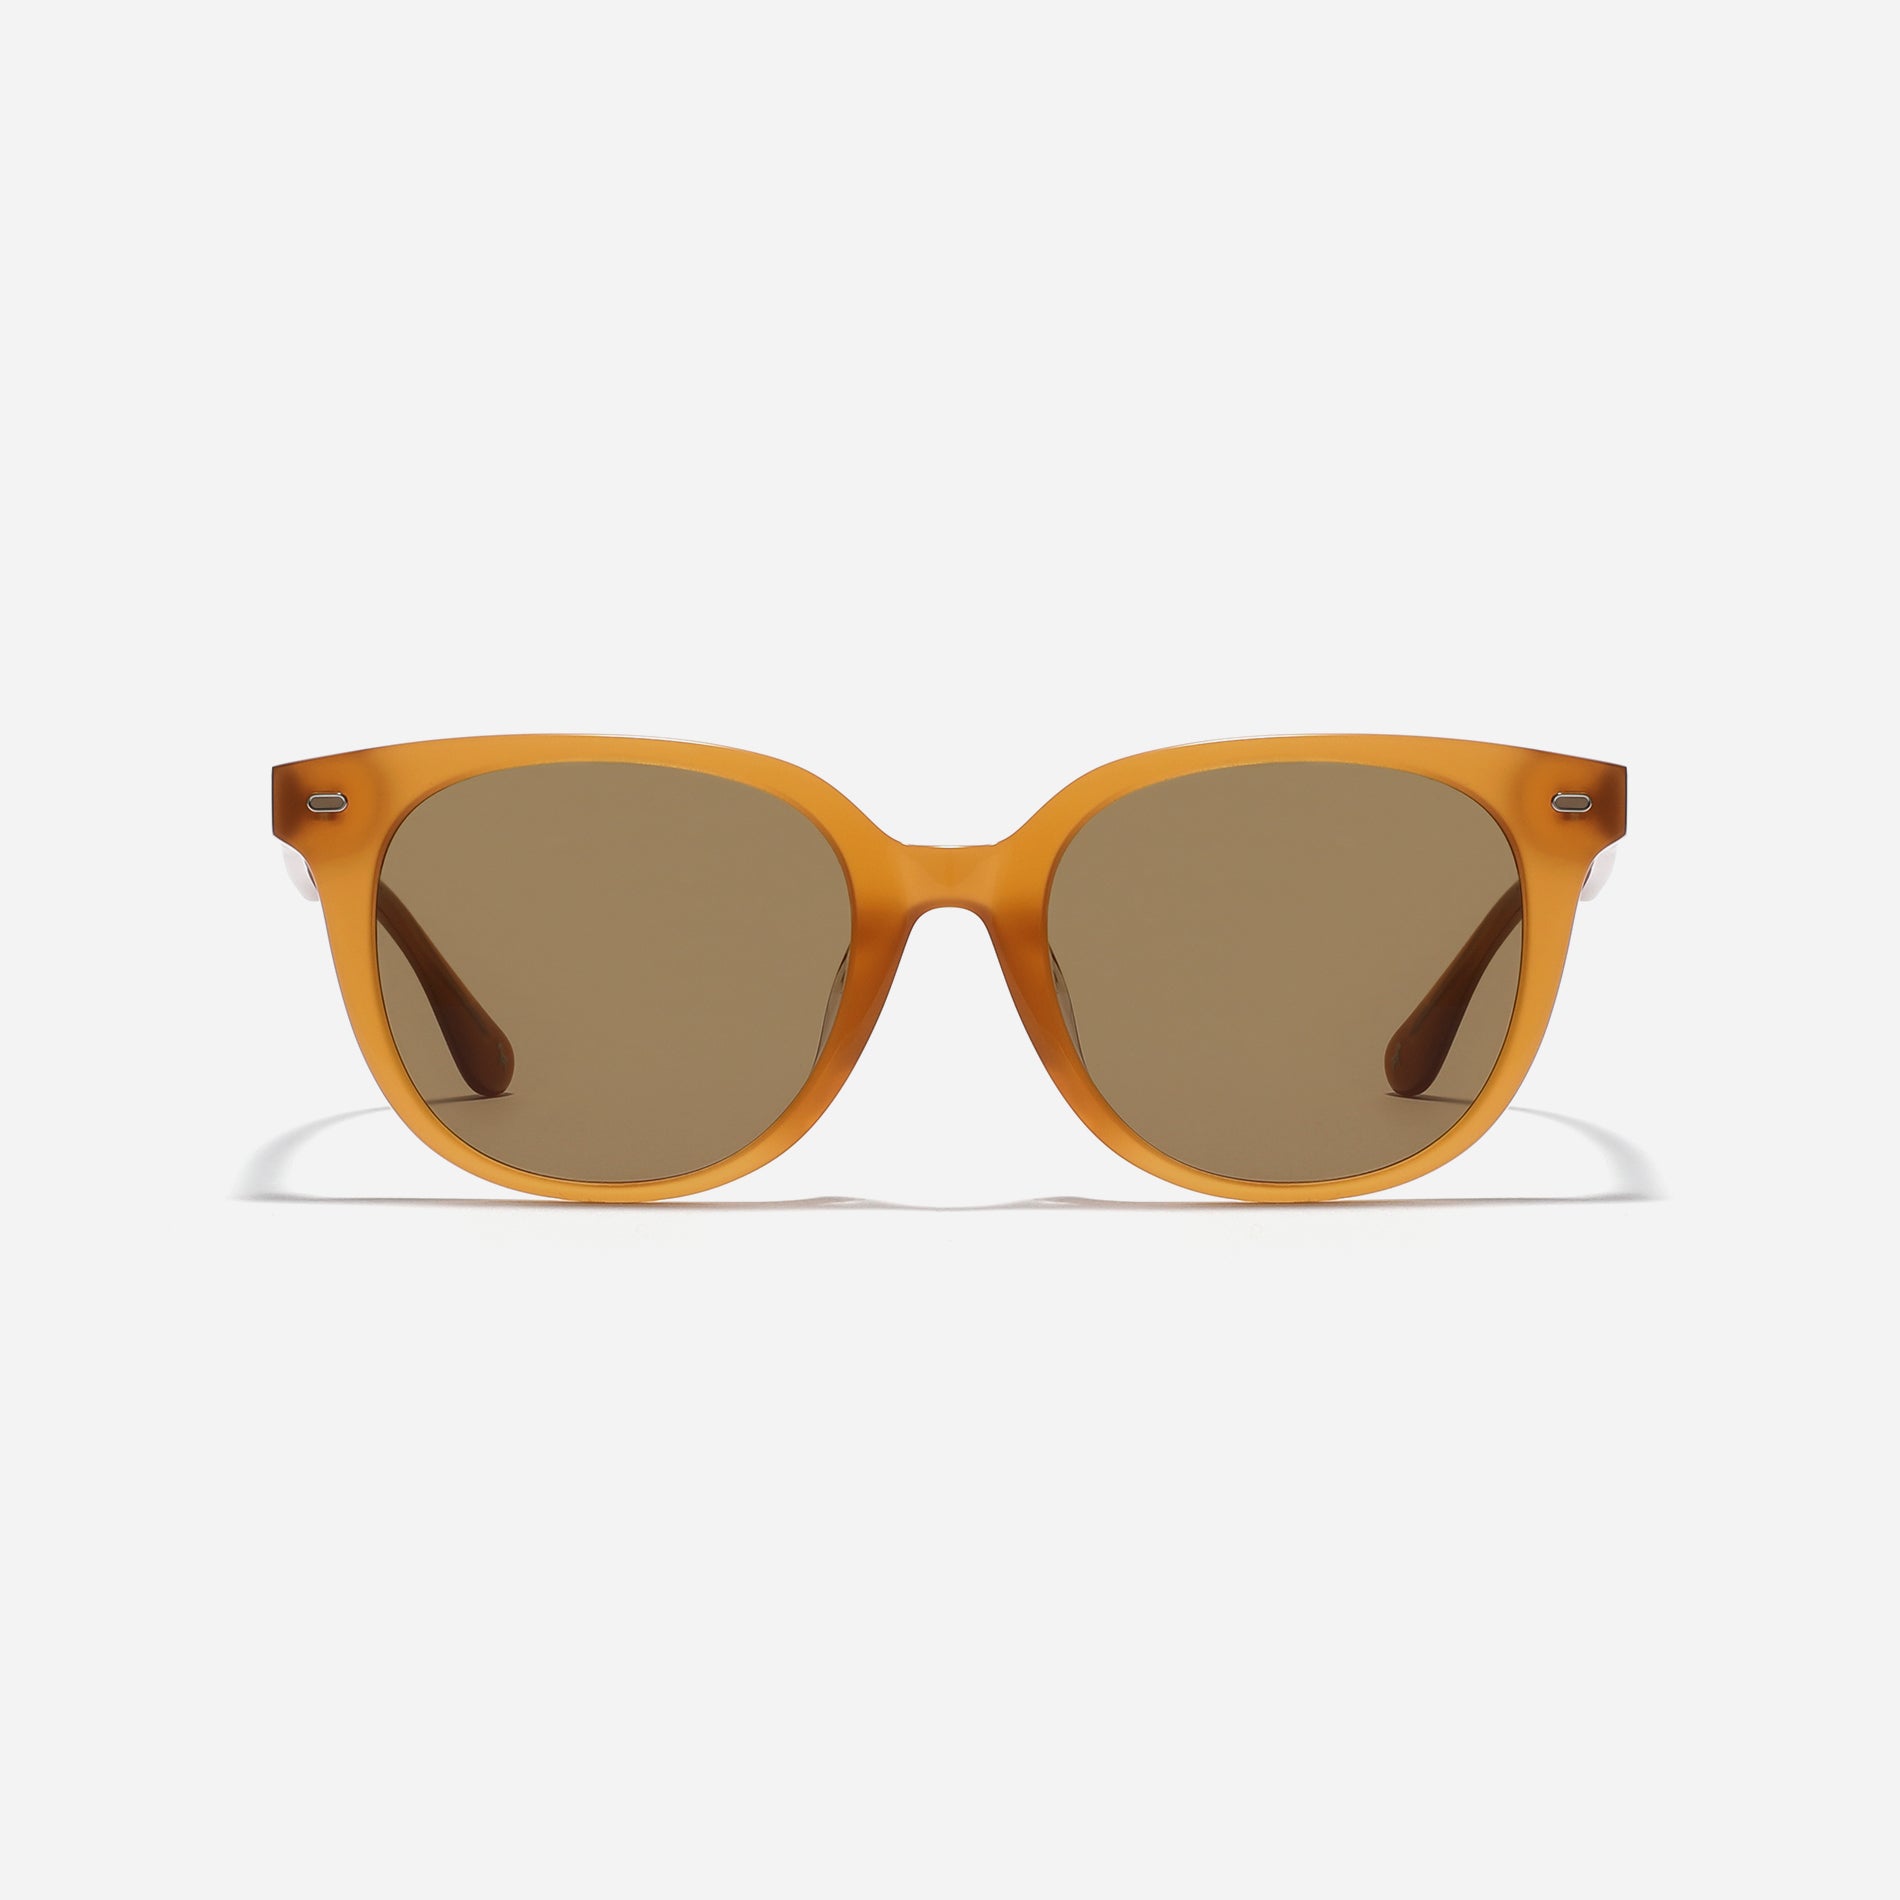 Square-shaped sunglasses from the Forest Line. With their soft form and stylish square frame, Bonnie offer a versatile and fashionable option for everyday wear, especially appealing to those new to sunglasses.